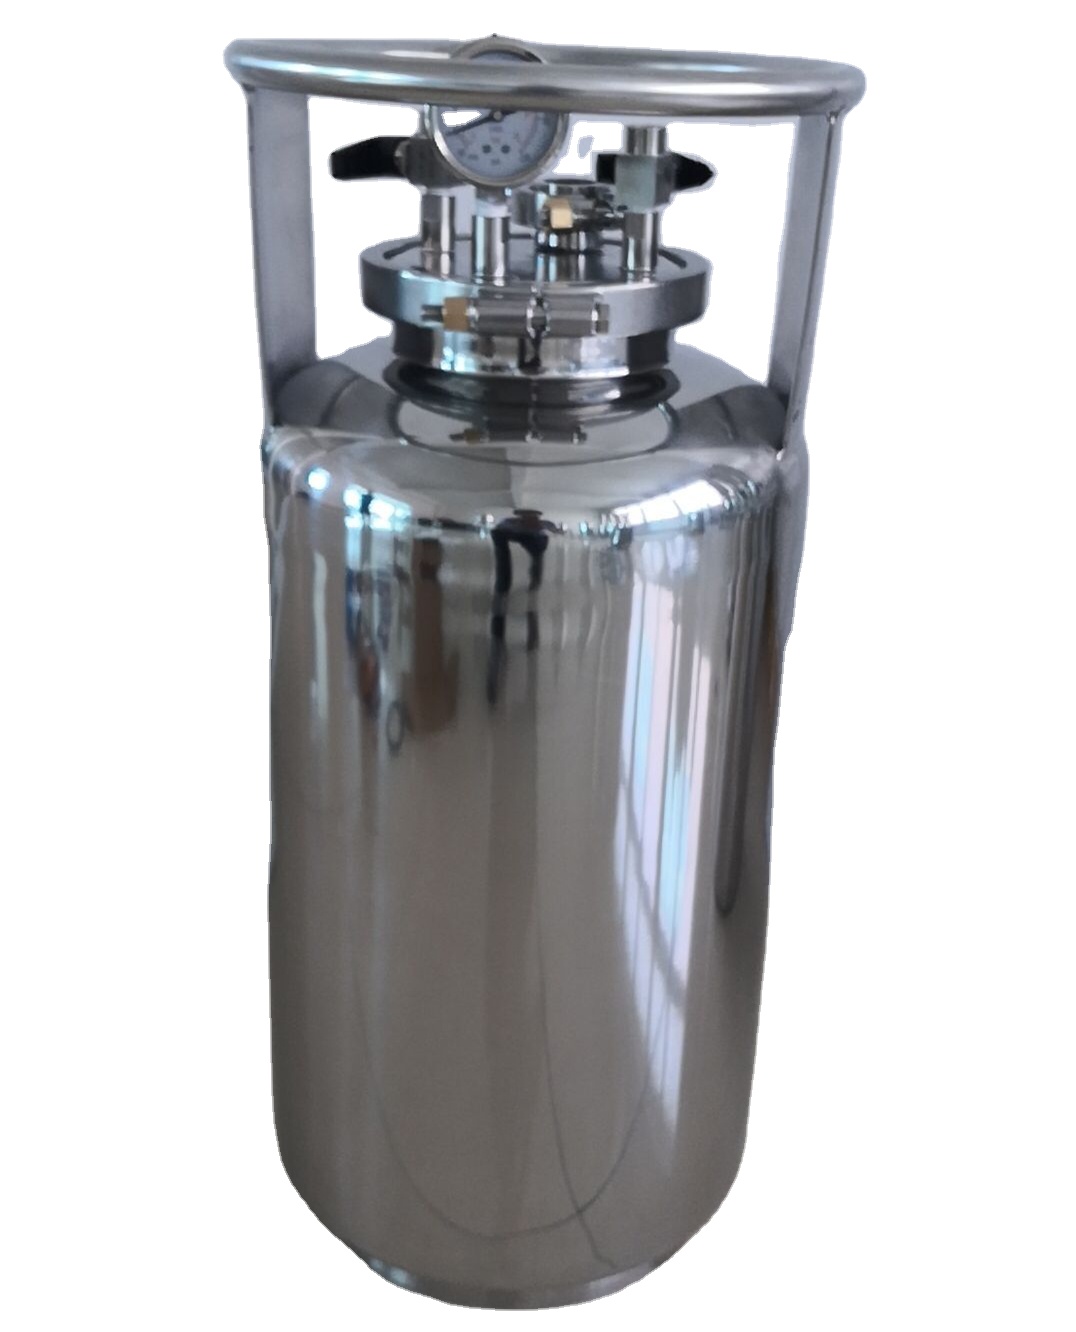  Sanitary Stainless Steel Solvent Recovery Tank